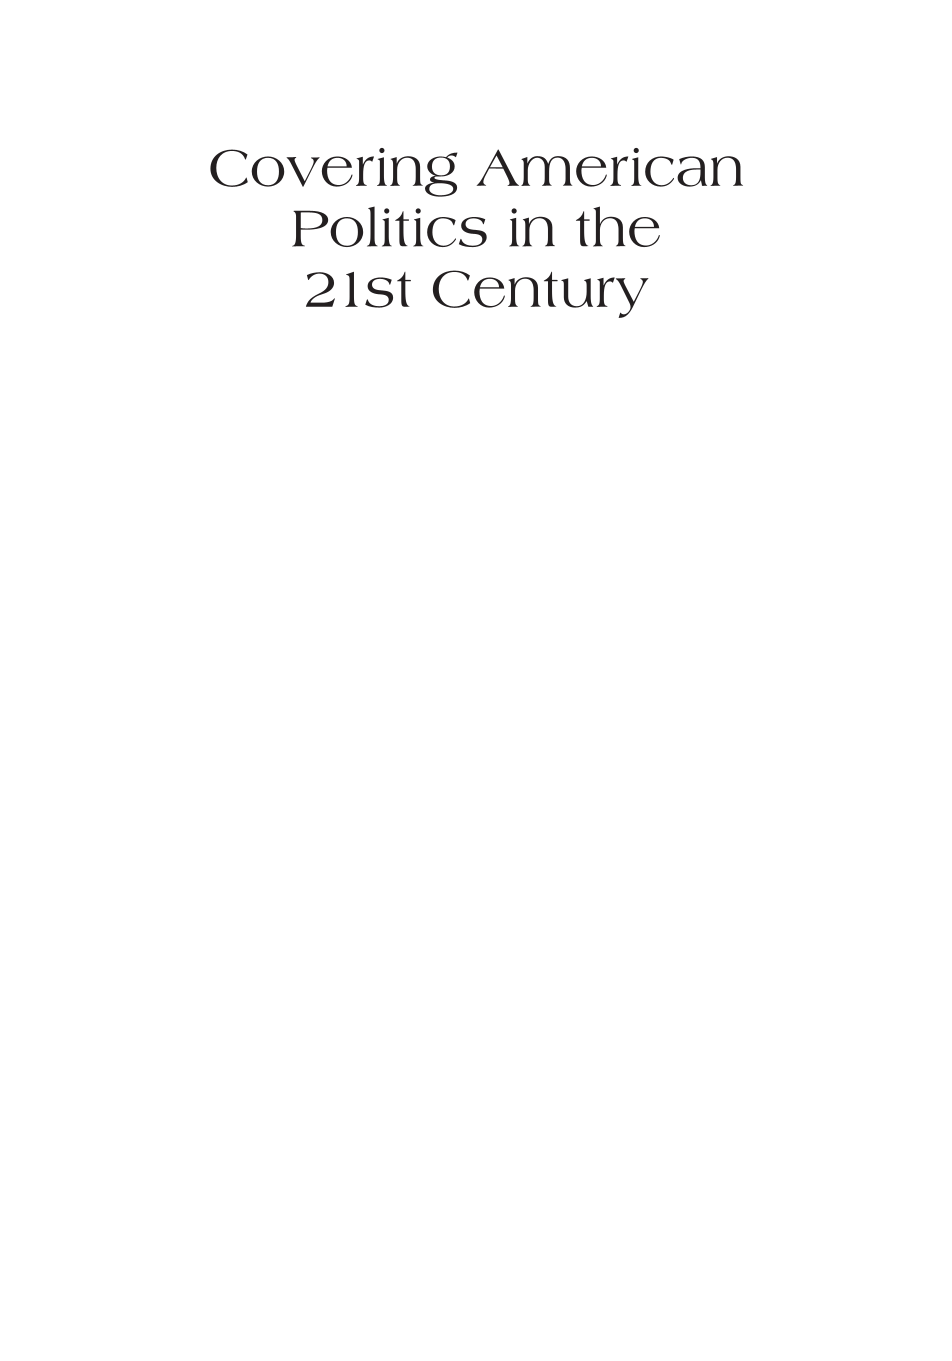 Covering American Politics in the 21st Century: An Encyclopedia of News Media Titans, Trends, and Controversies [2 volumes] page i